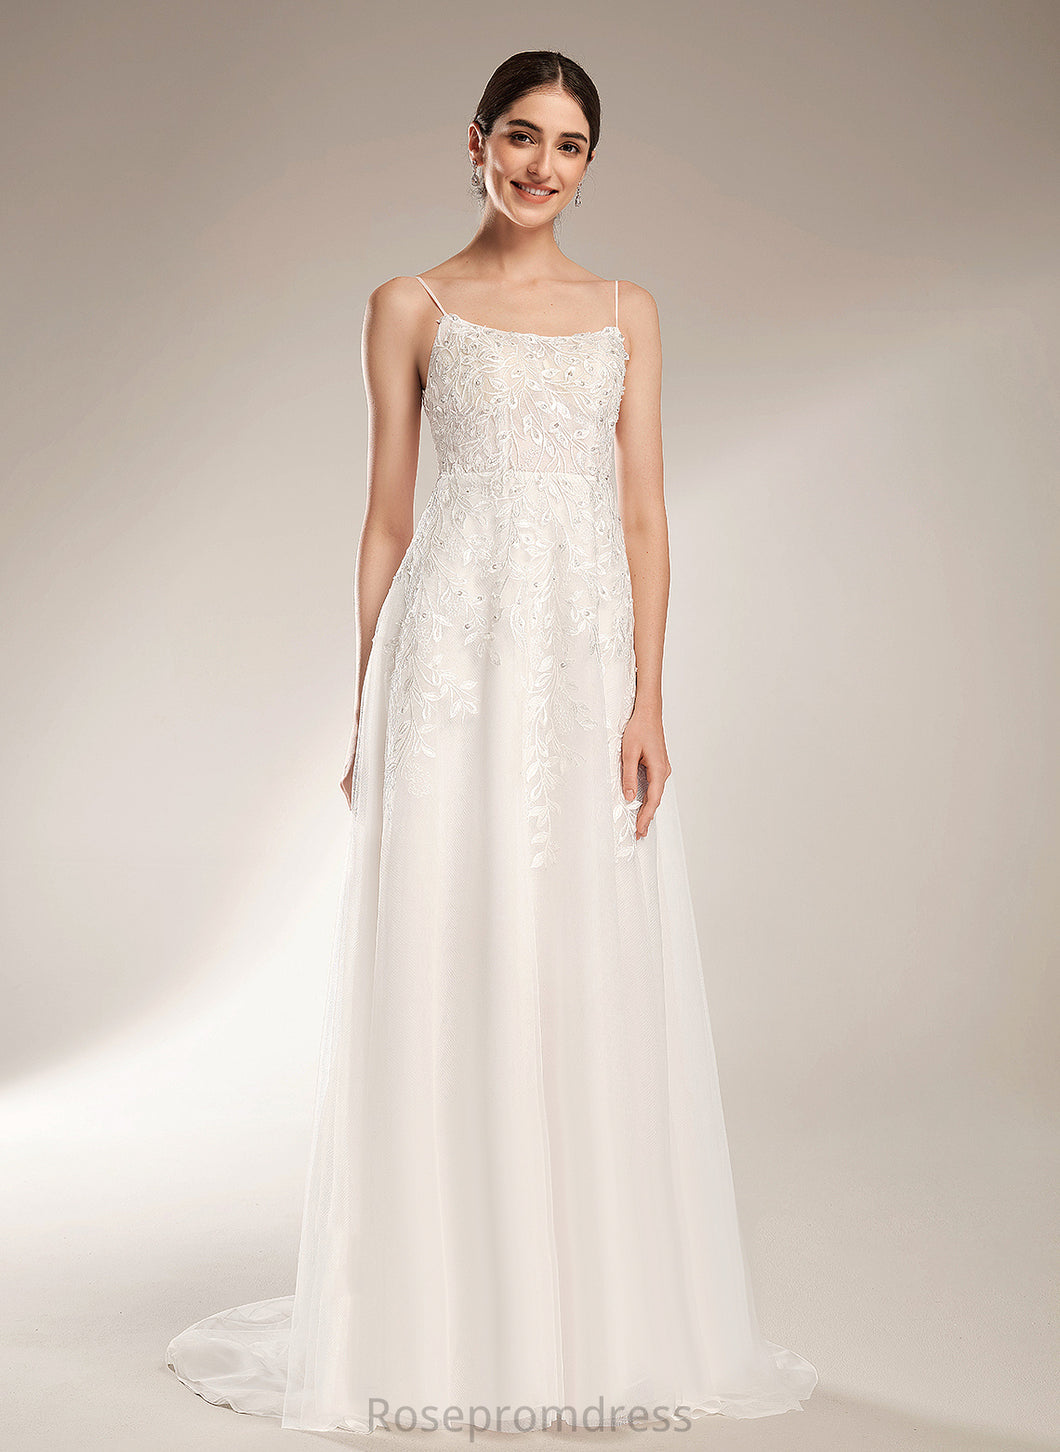 Lace Tulle Ashtyn Wedding Dresses Dress Square Wedding Sequins Neckline Train A-Line With Court Beading